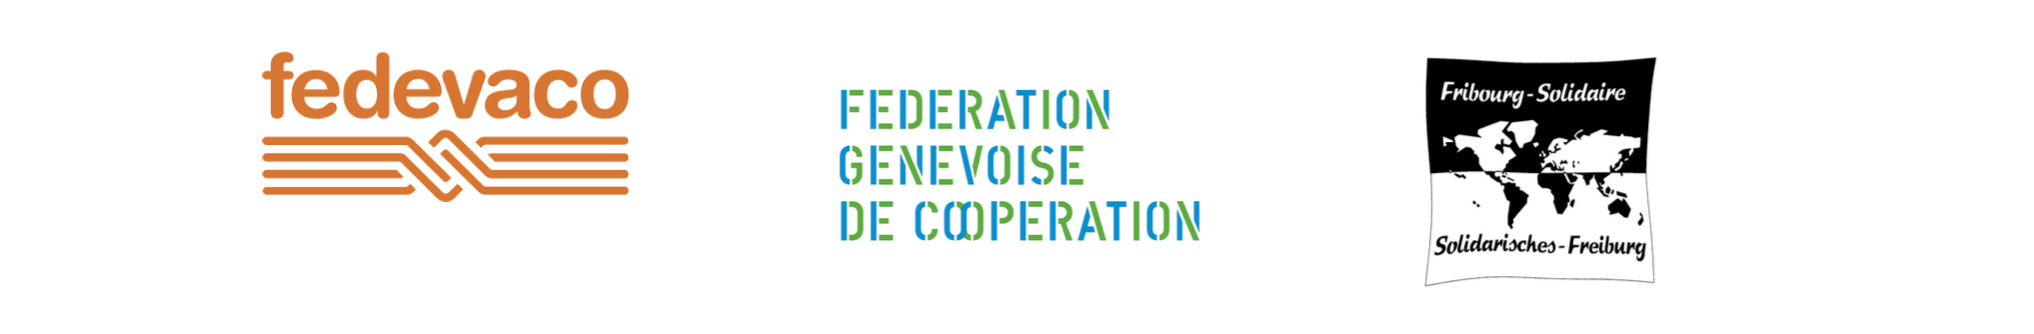 Fedevaco, Federation Genevoise de Cooperation, Fribourg-Solidaire